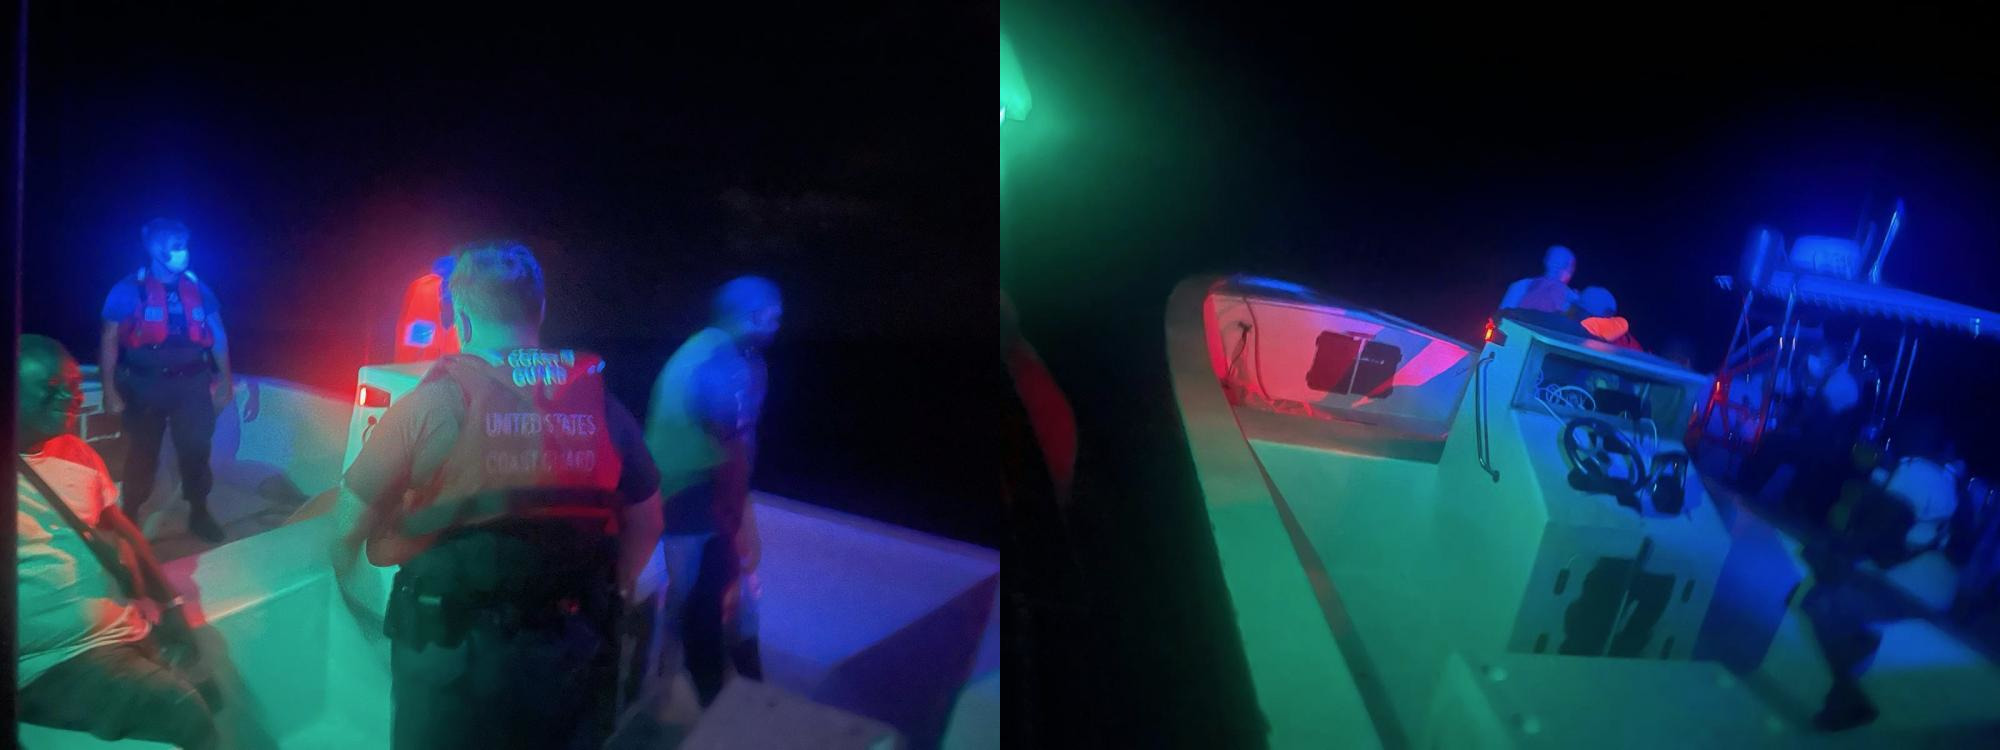 Coast Guard Rescues 3 Dutch And 1 French Boater Adrift for Three Days Near BVI